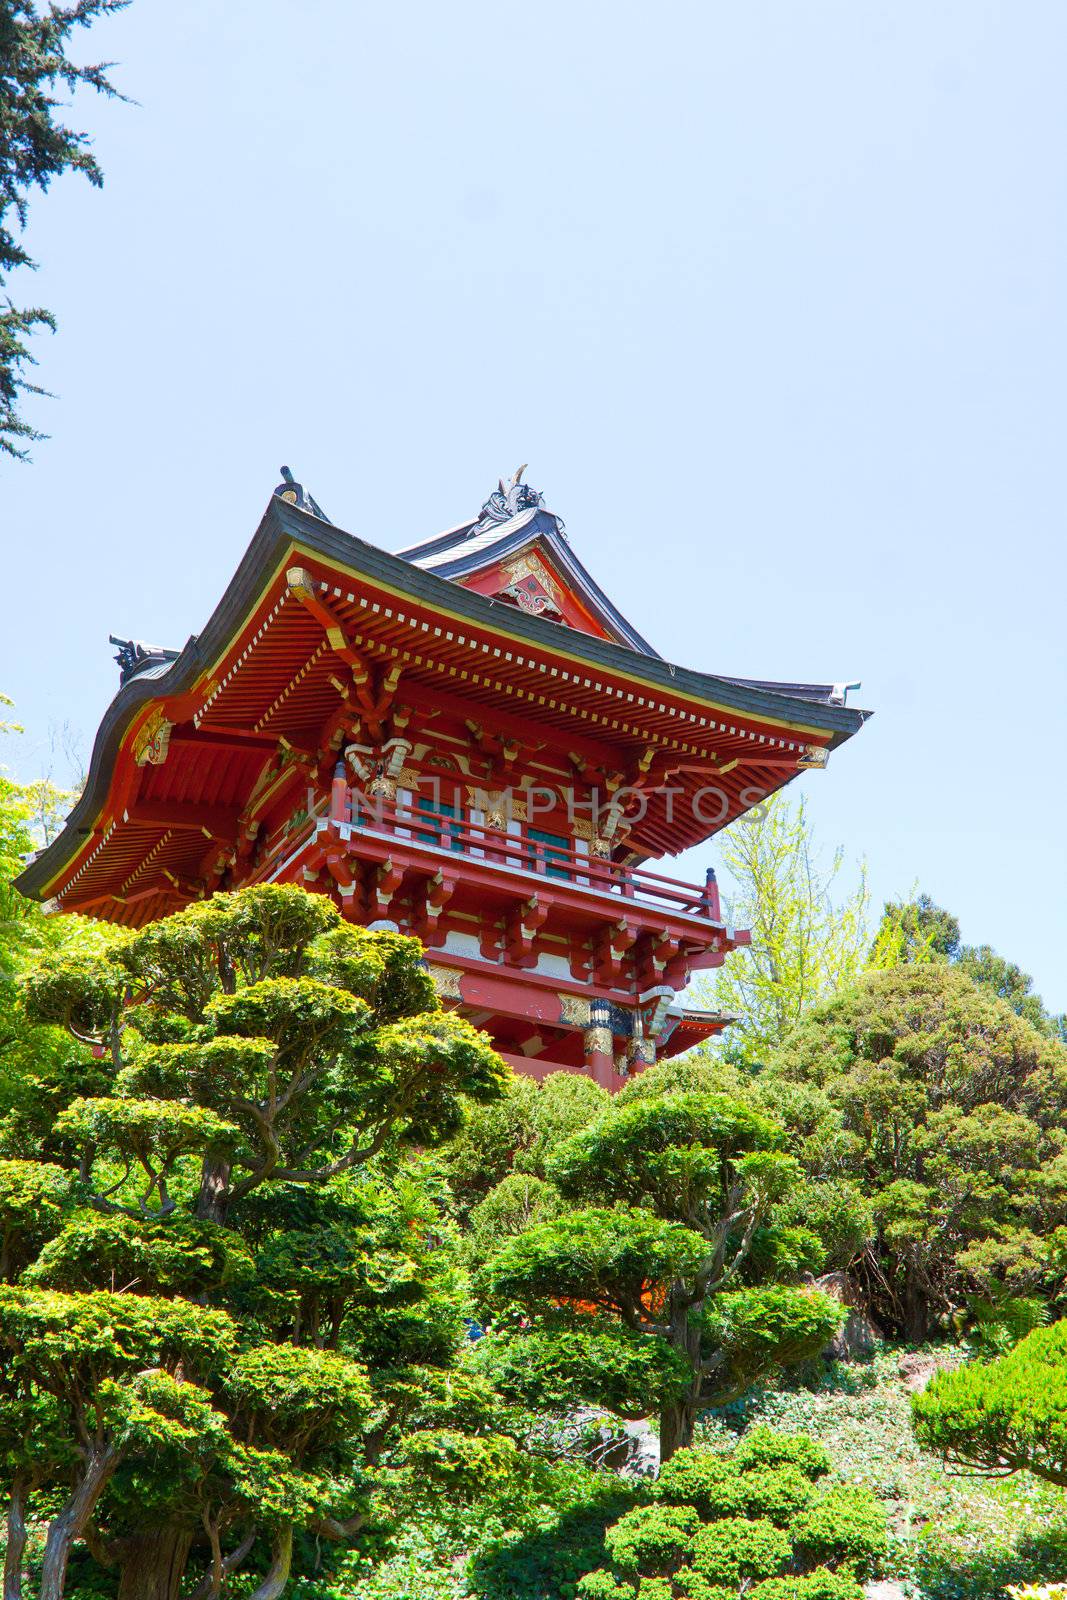 A bright red Japanese pagoda building in a tea garden sits peacefully.